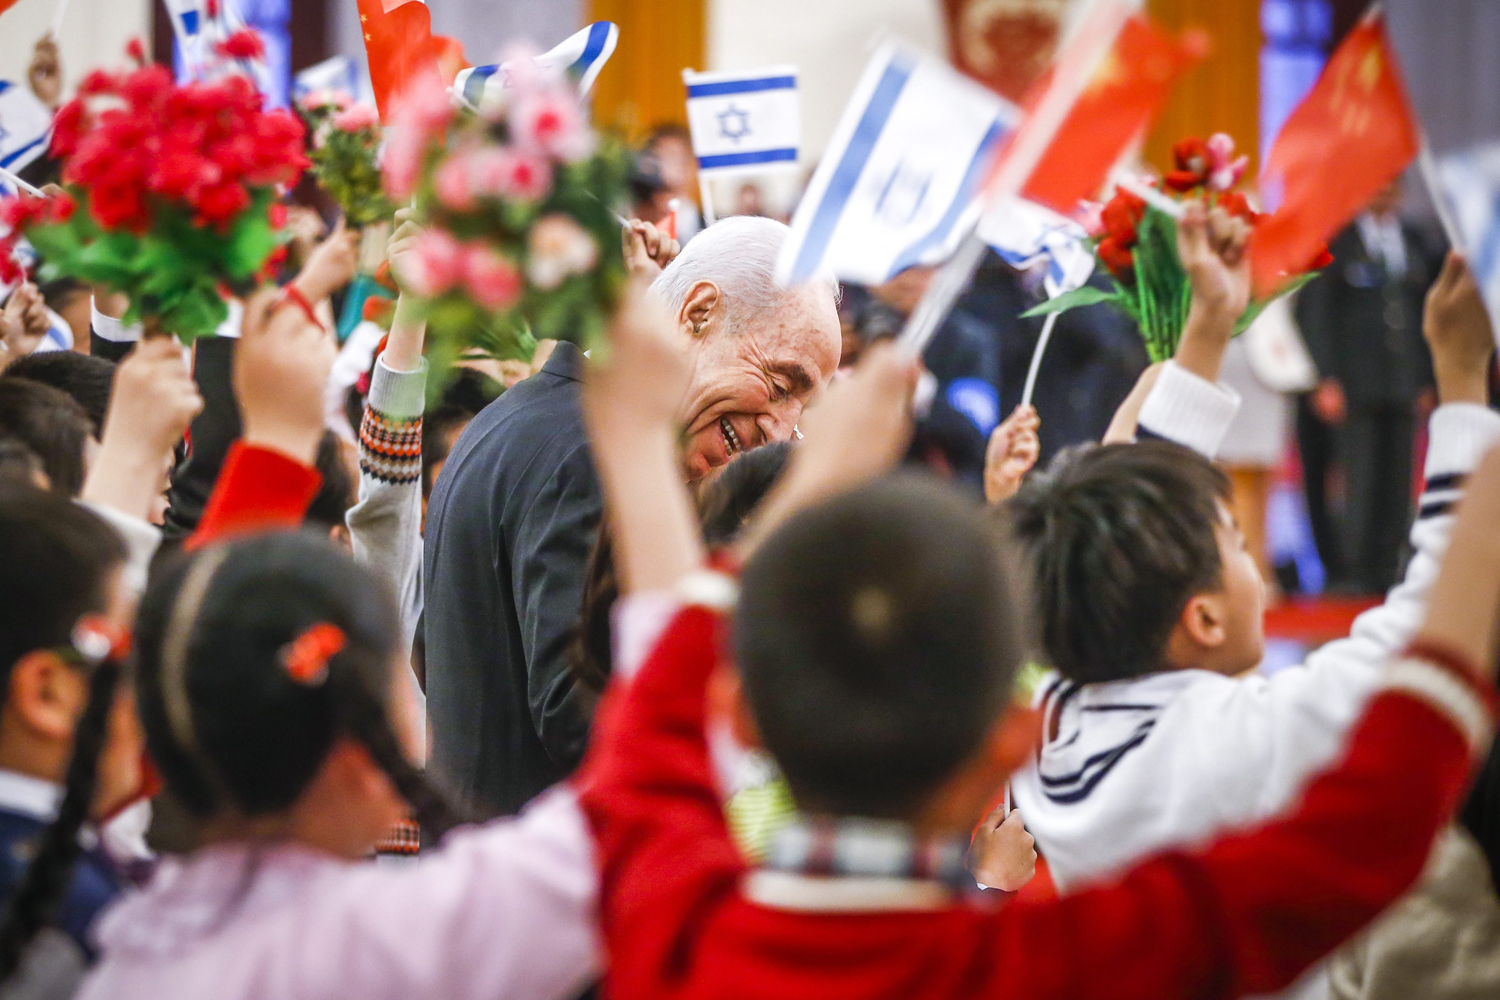 Israeli President Shimon Peres, center, talks to school children holding Chinese and Israeli national flags during a welcoming ceremony hosted by Chinese President Xi Jinping (not pictured) inside the Great Hall of the People in Beijing on April 8, 2014.